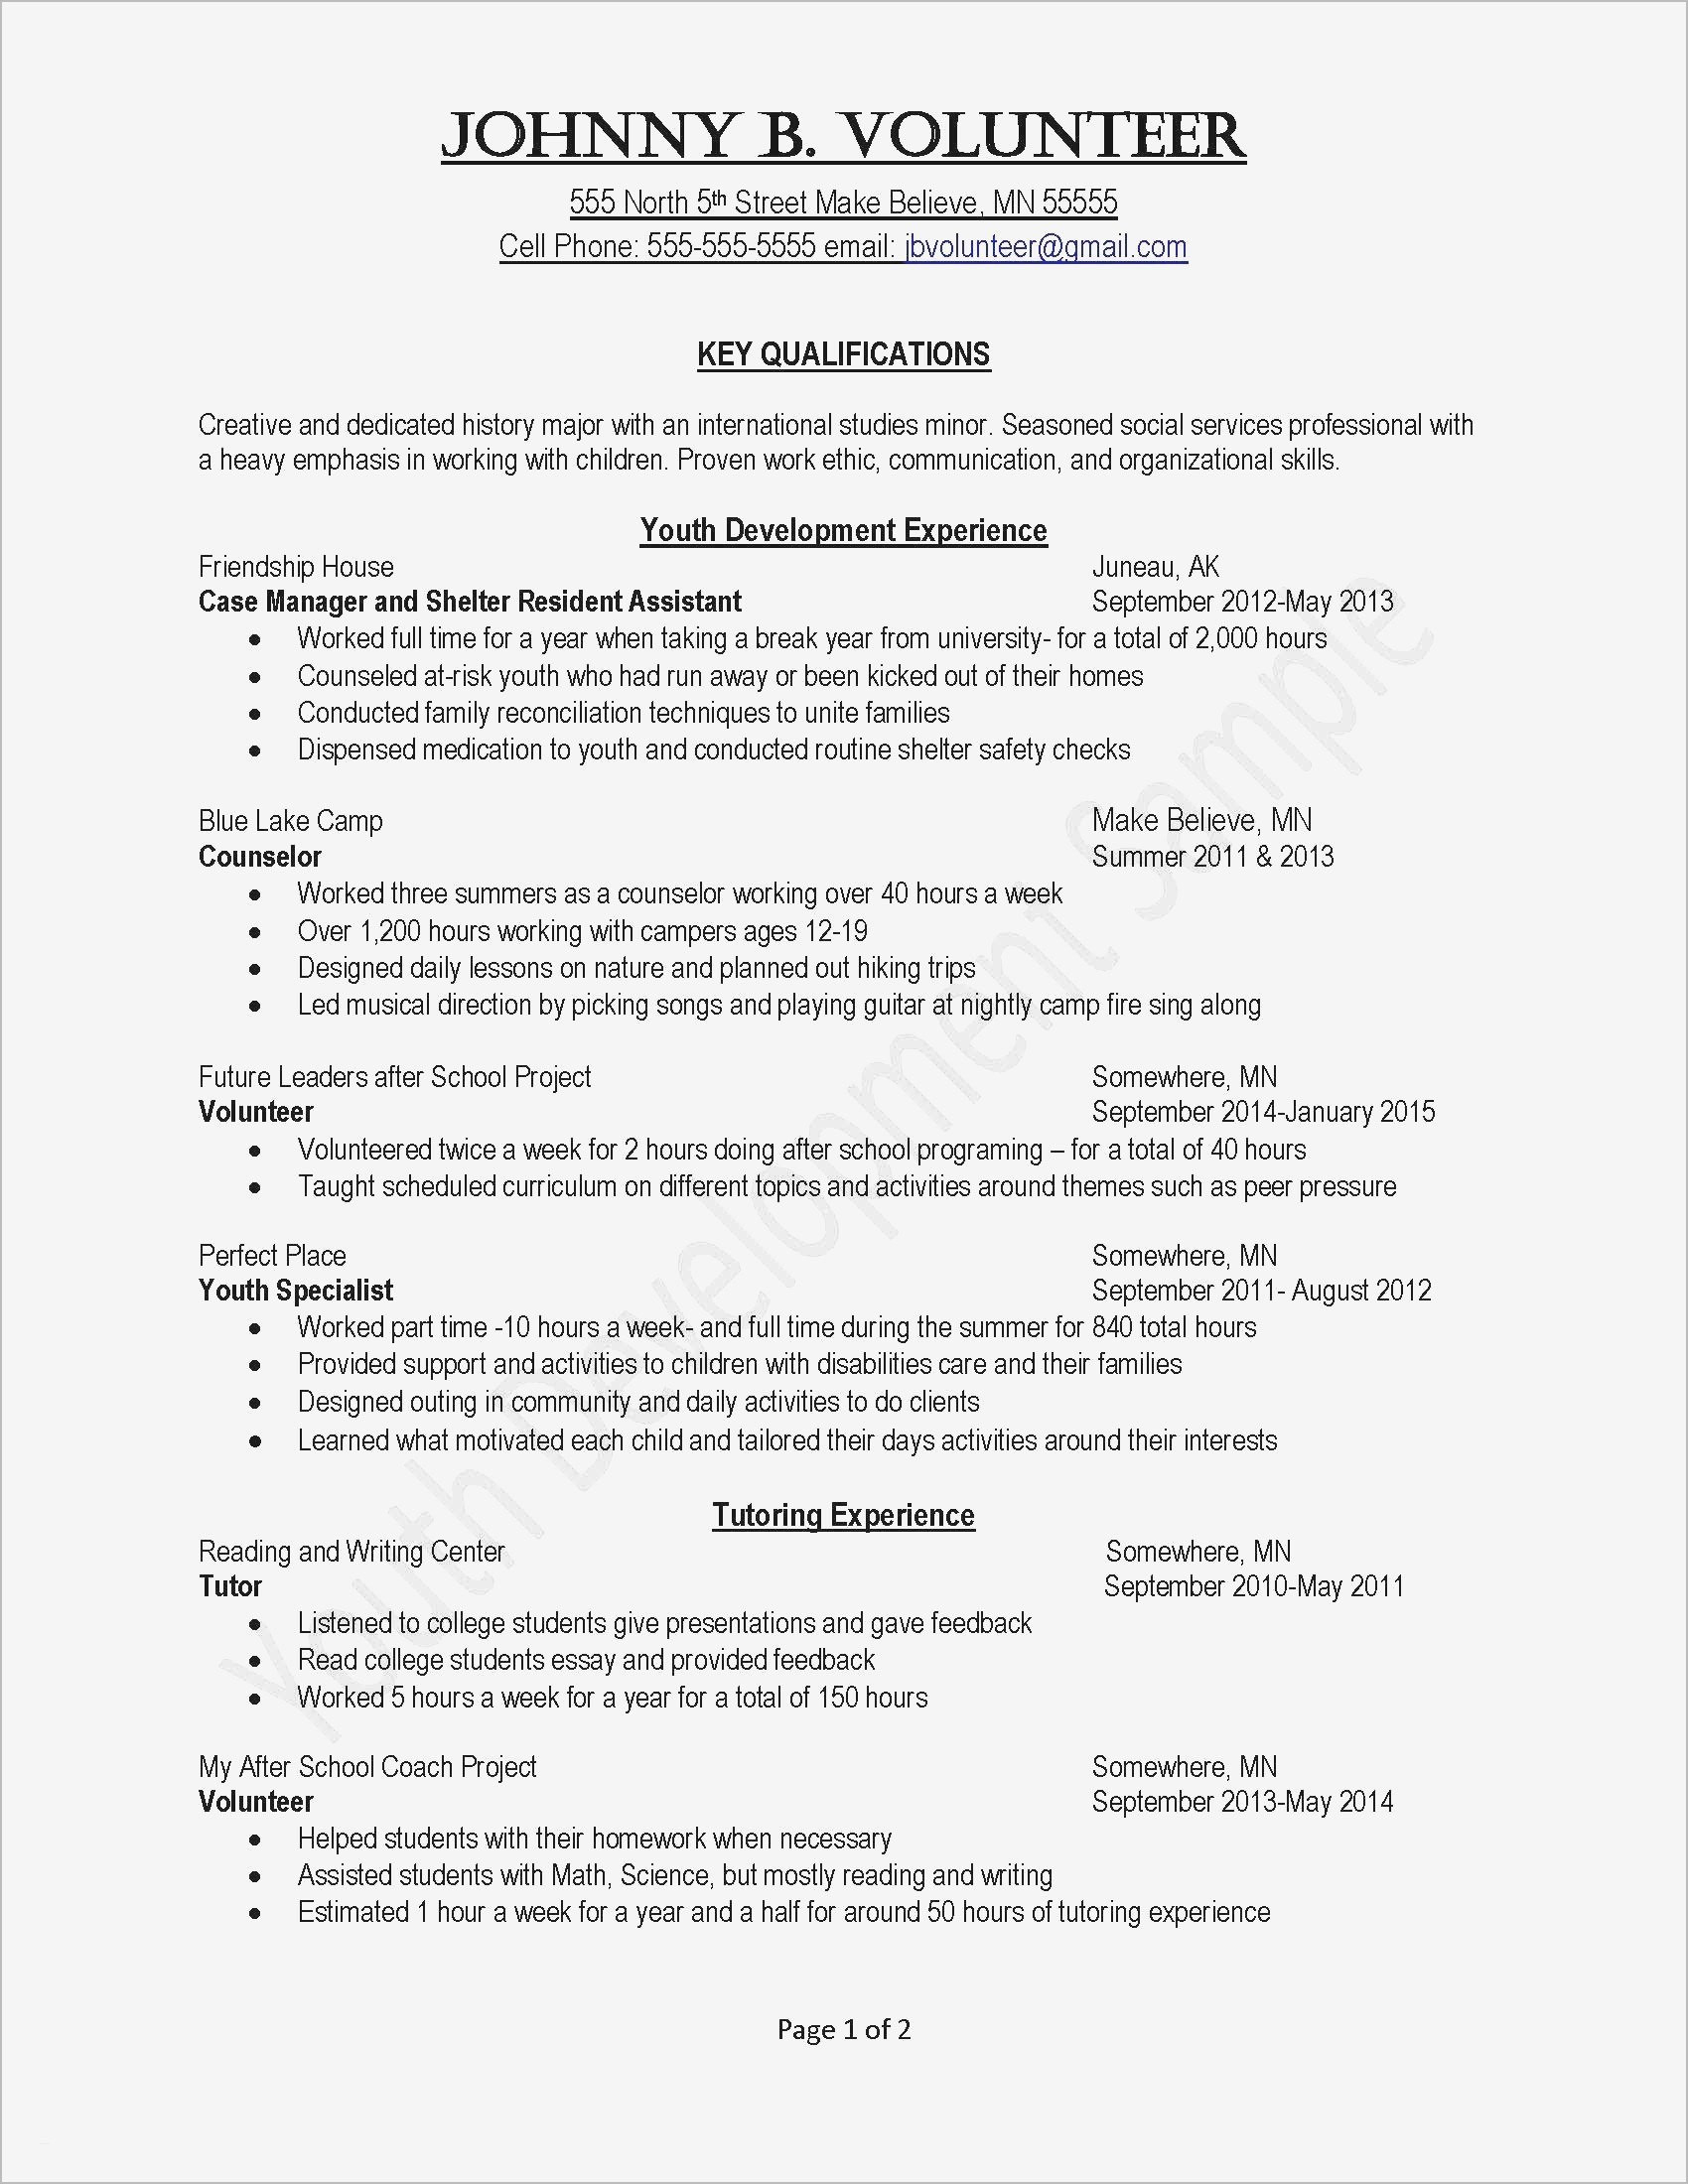 Resume Cover Letter Template Pdf - Professional Resume Cover Letter Template Best Perfect Professional